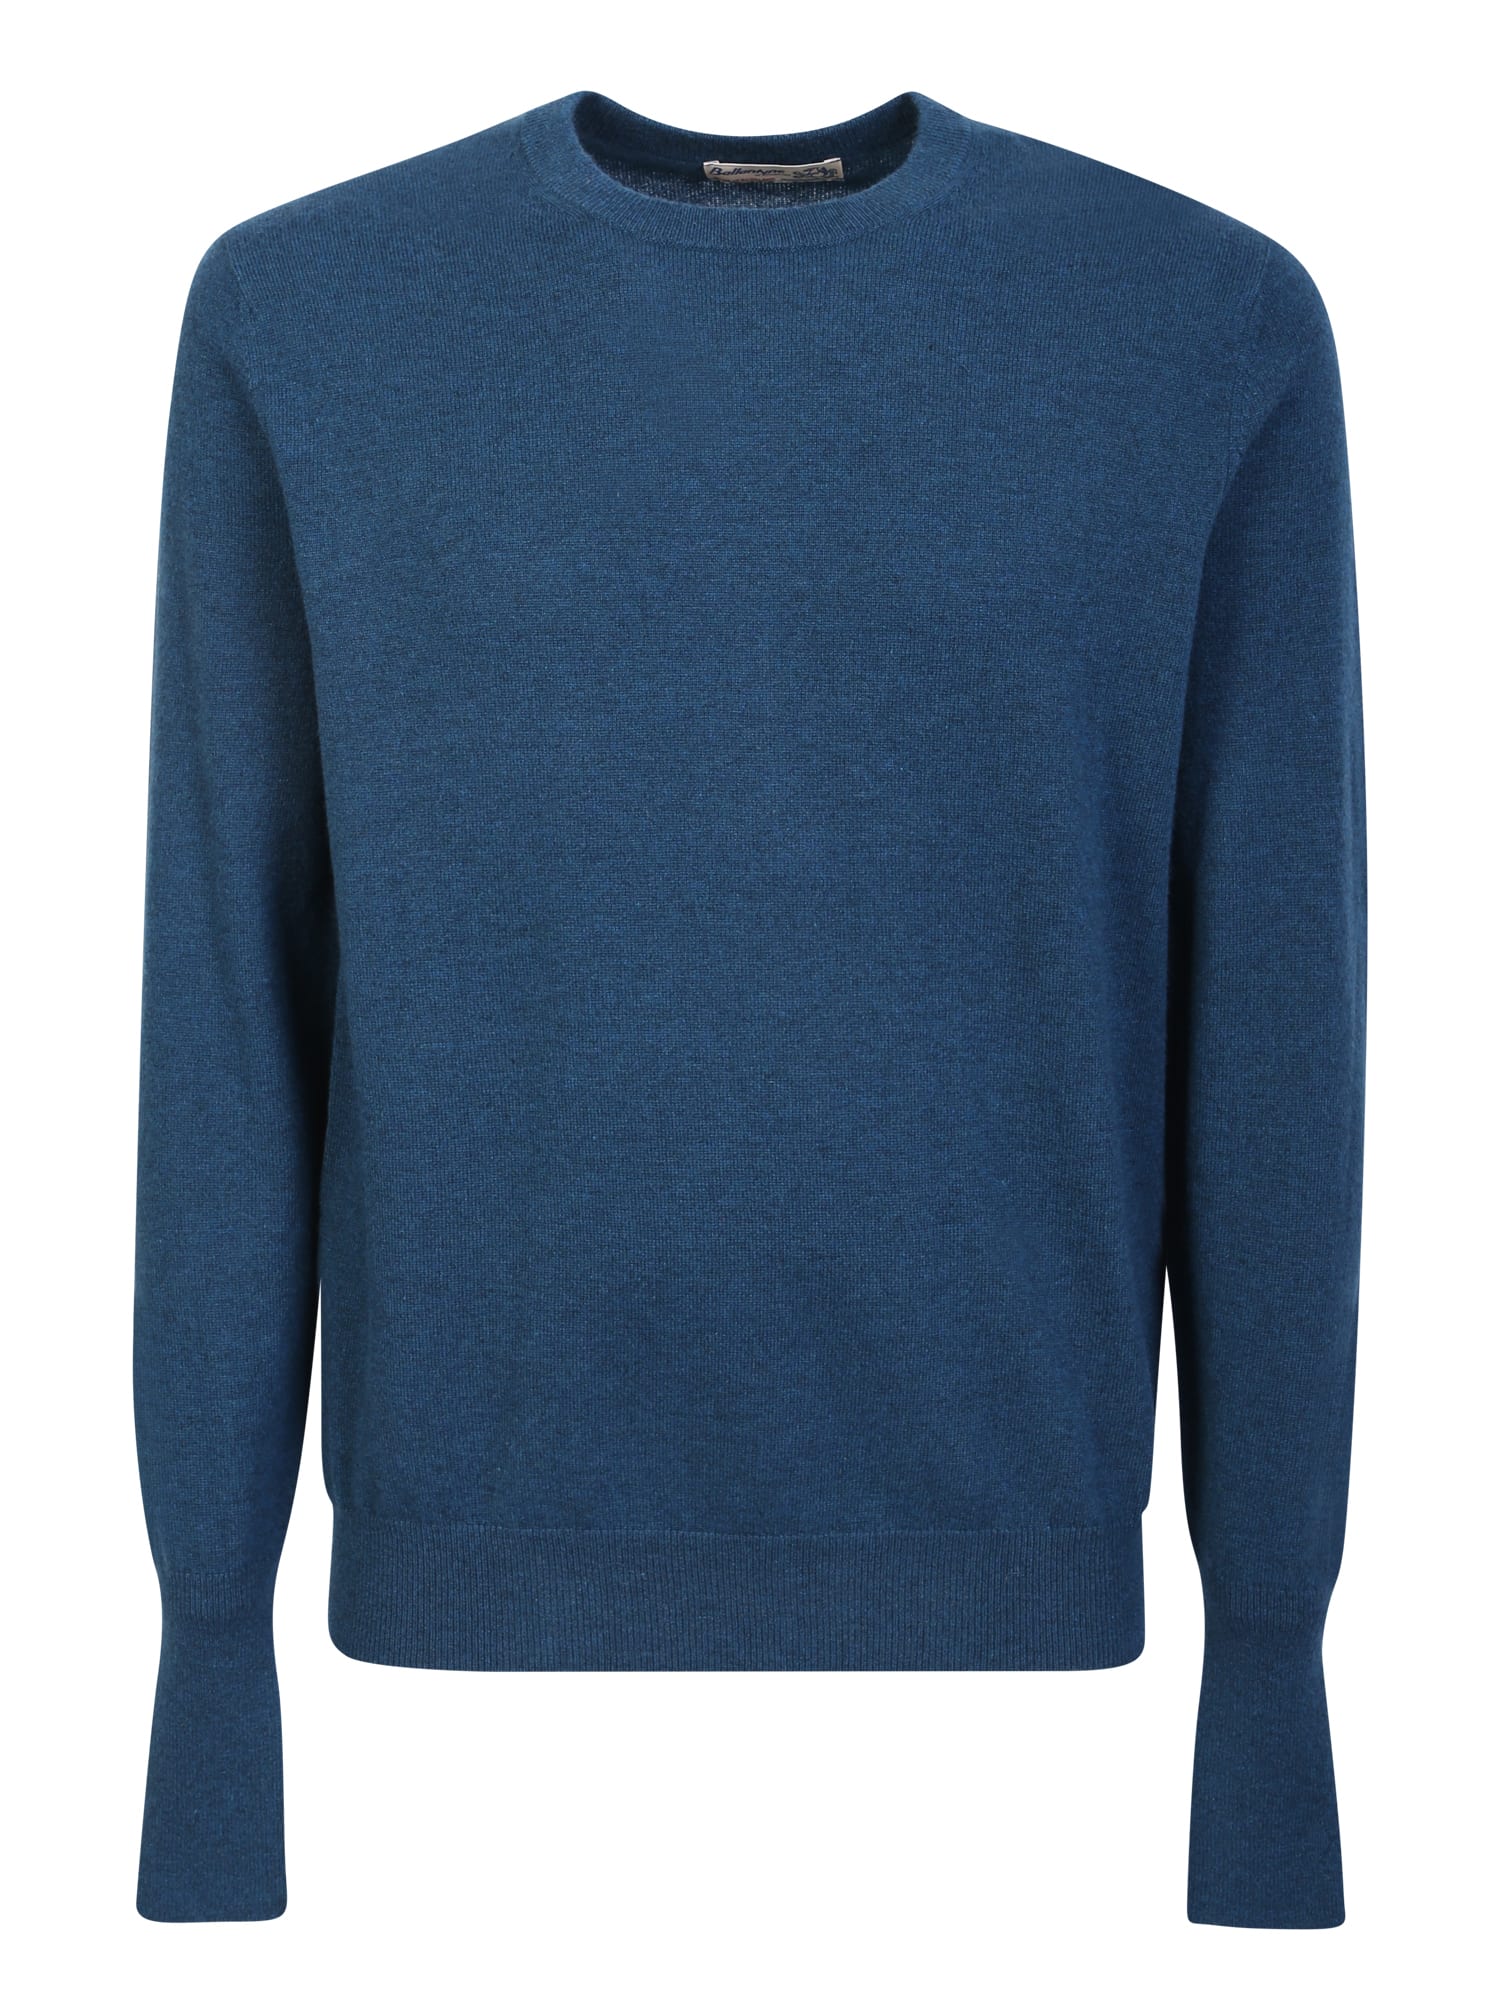 BALLANTYNE TURQUOISE CASHMERE PULLOVER